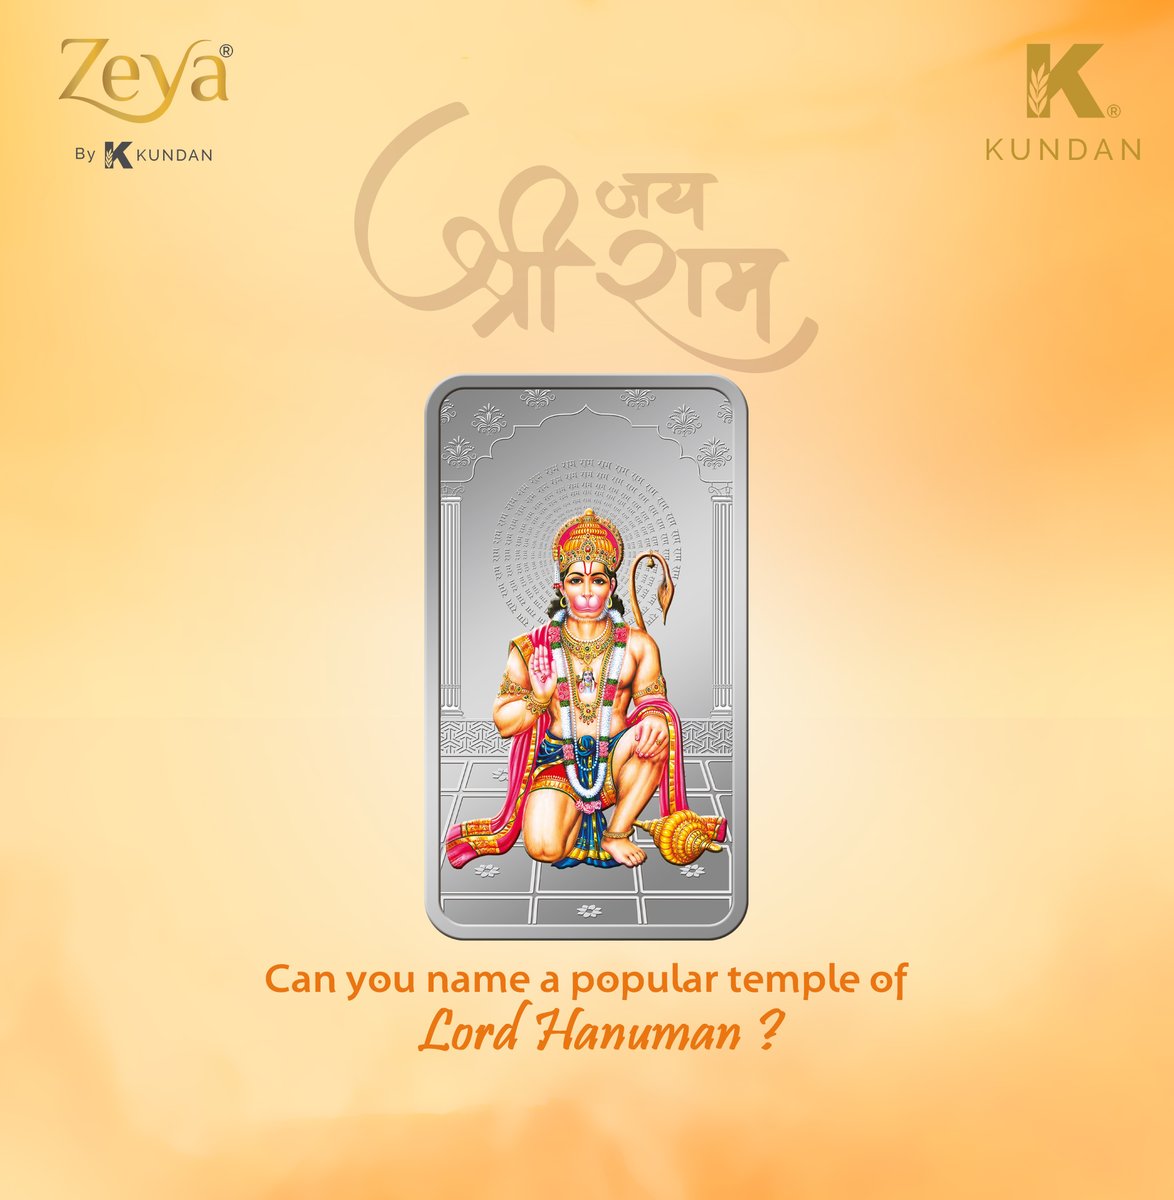 Put your thinking cap on and name down famous Lord Hanuman temples.

#BharosaHaiTohHumHai #KundanCoins #purity #Investinyourdreams #GoldBar #futureinvestment #buyback #Bestinvestment #GoldCoins #GoldPendants #investment #securedfuture #future #investingold #goldinvestment